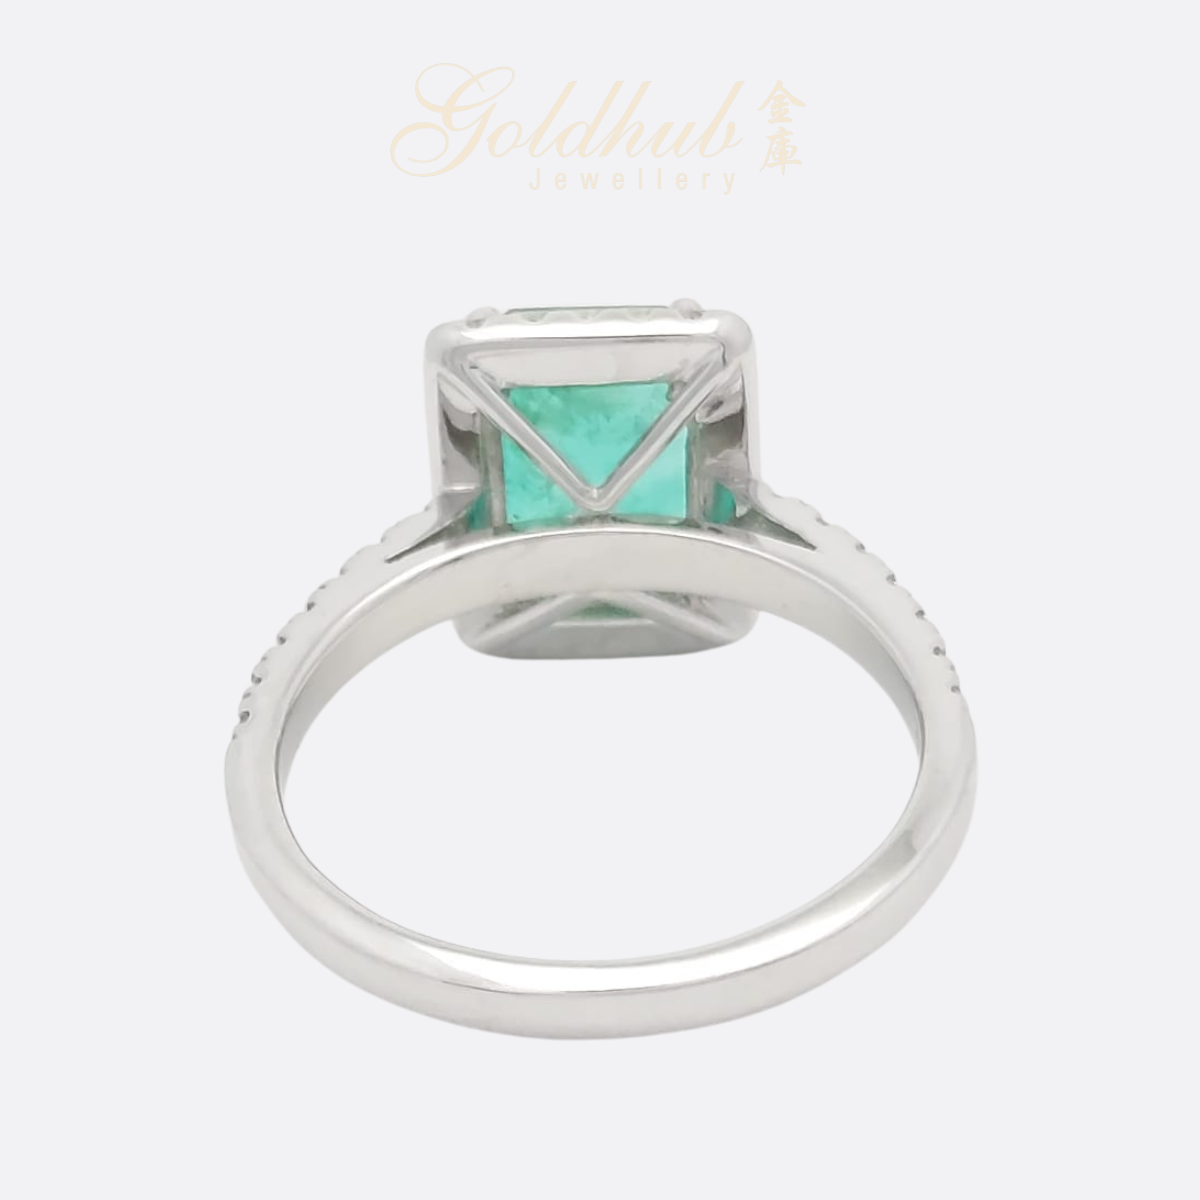 FURTHER DISCOUNTED] 18K Emerald Diamond Ring in White Gold